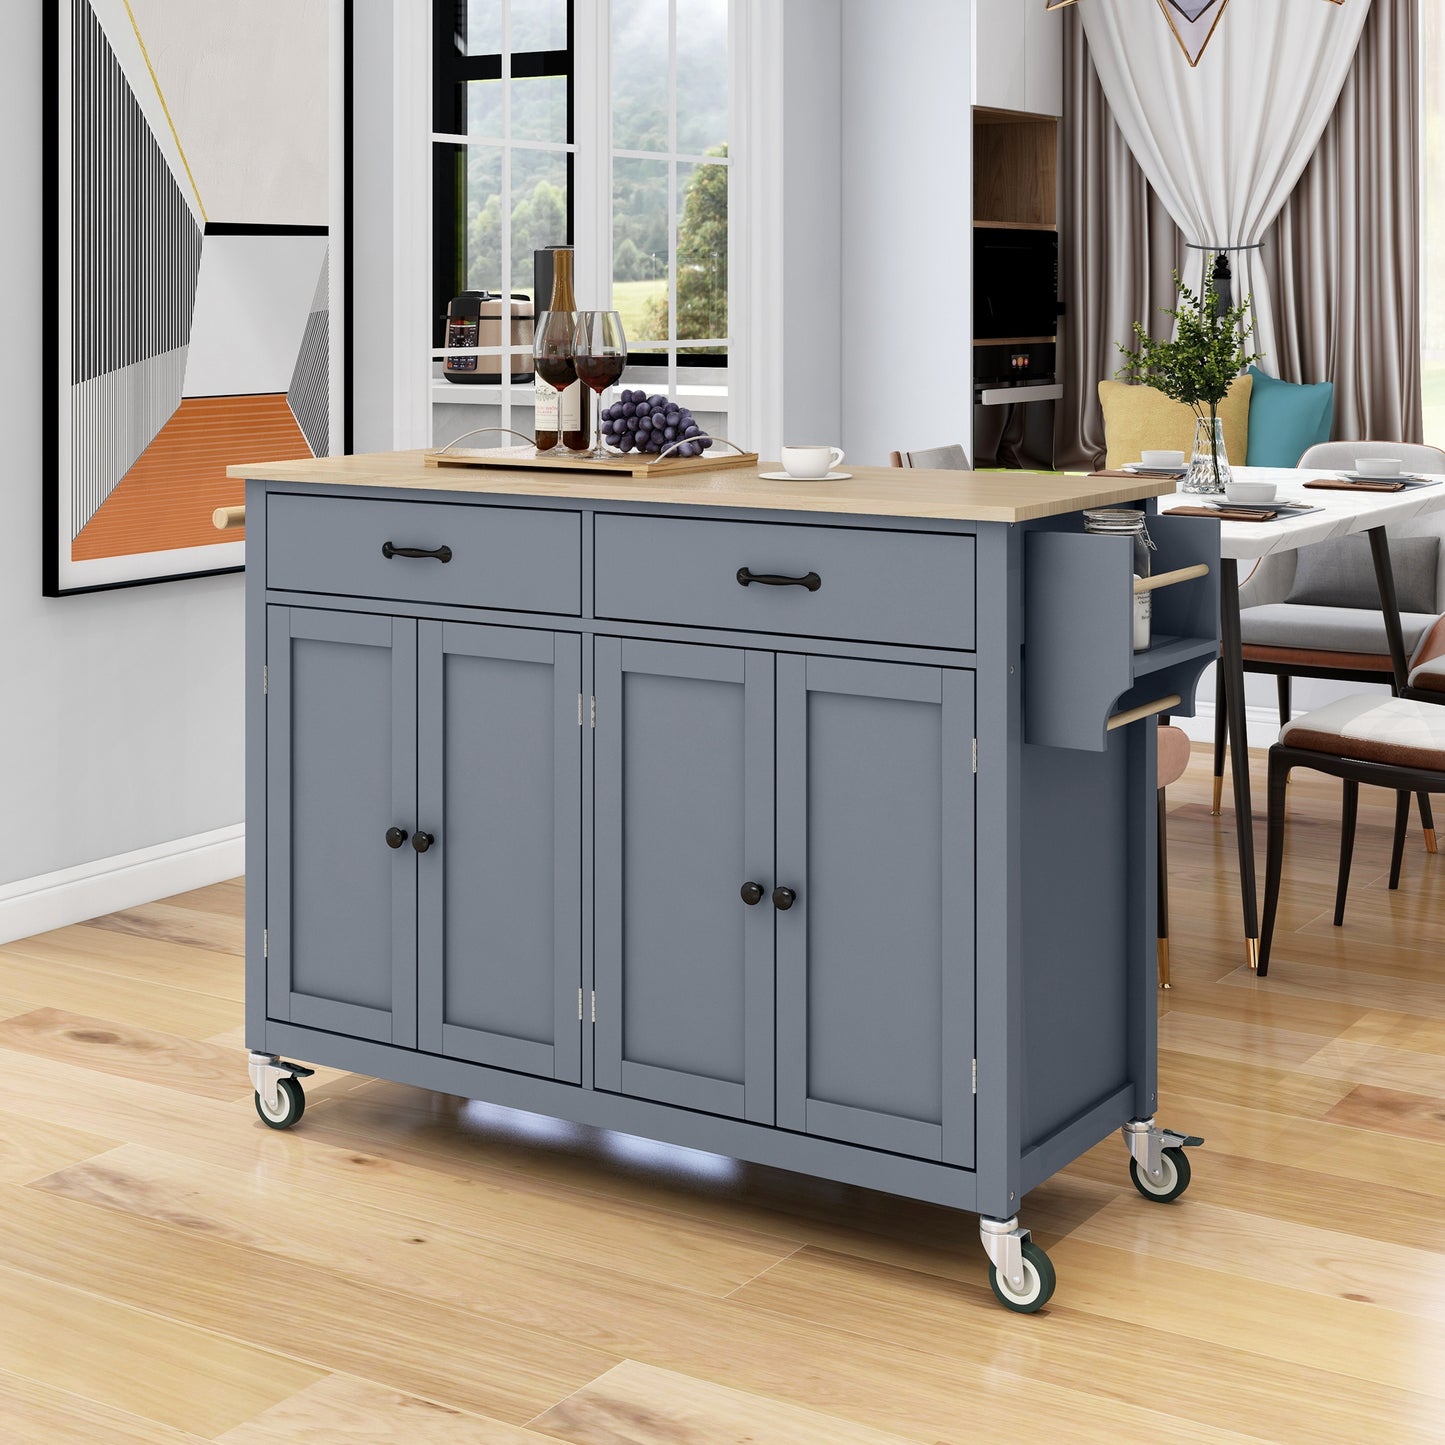 K&K Mobile Kitchen Island Cart with Solid Wood Top- Gray Blue